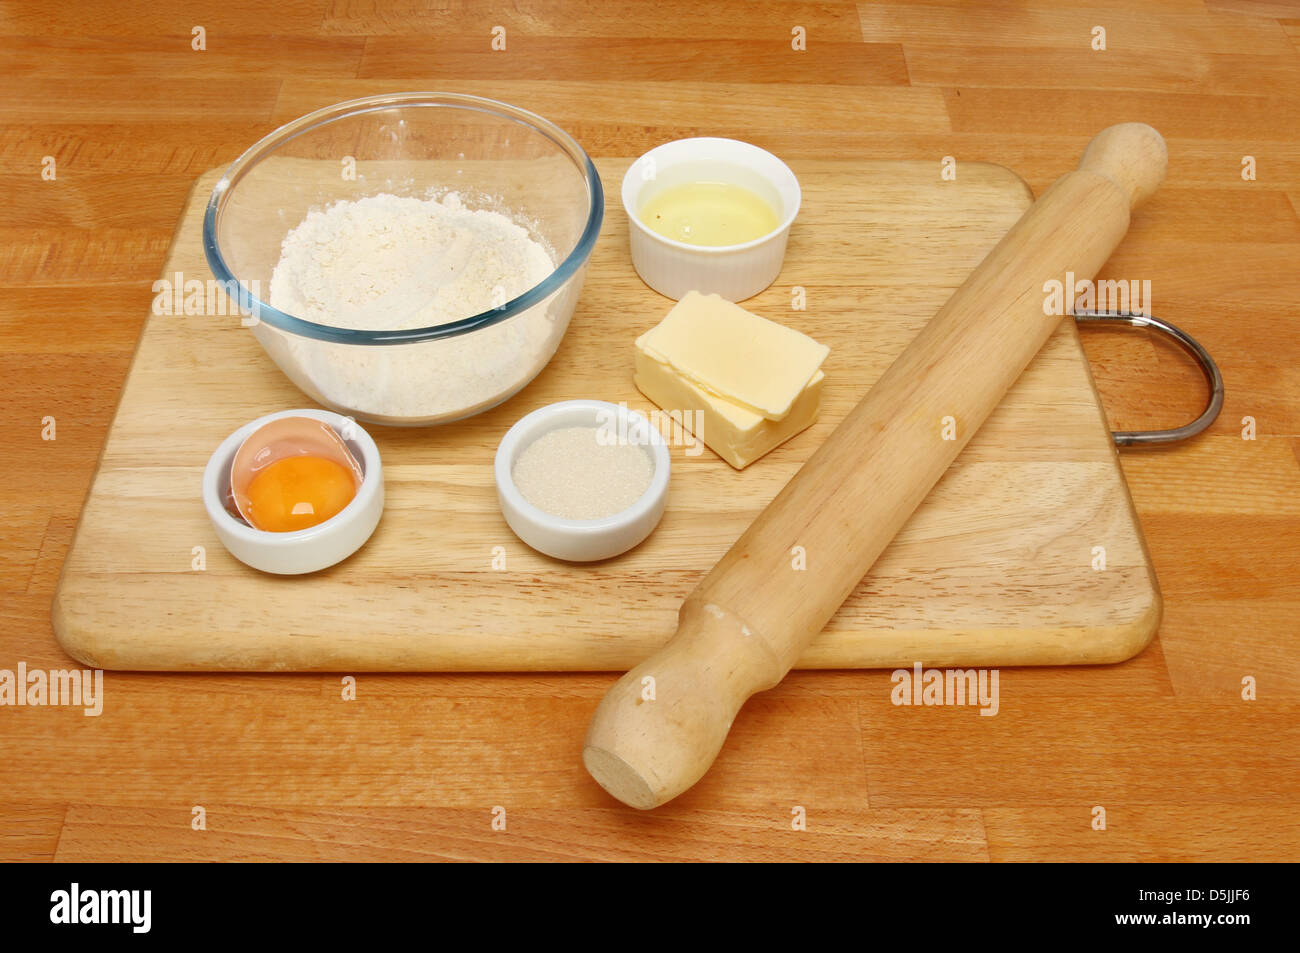 Pastry ingredients and rolling pin on a wooden board on a kitchen worktop Stock Photo